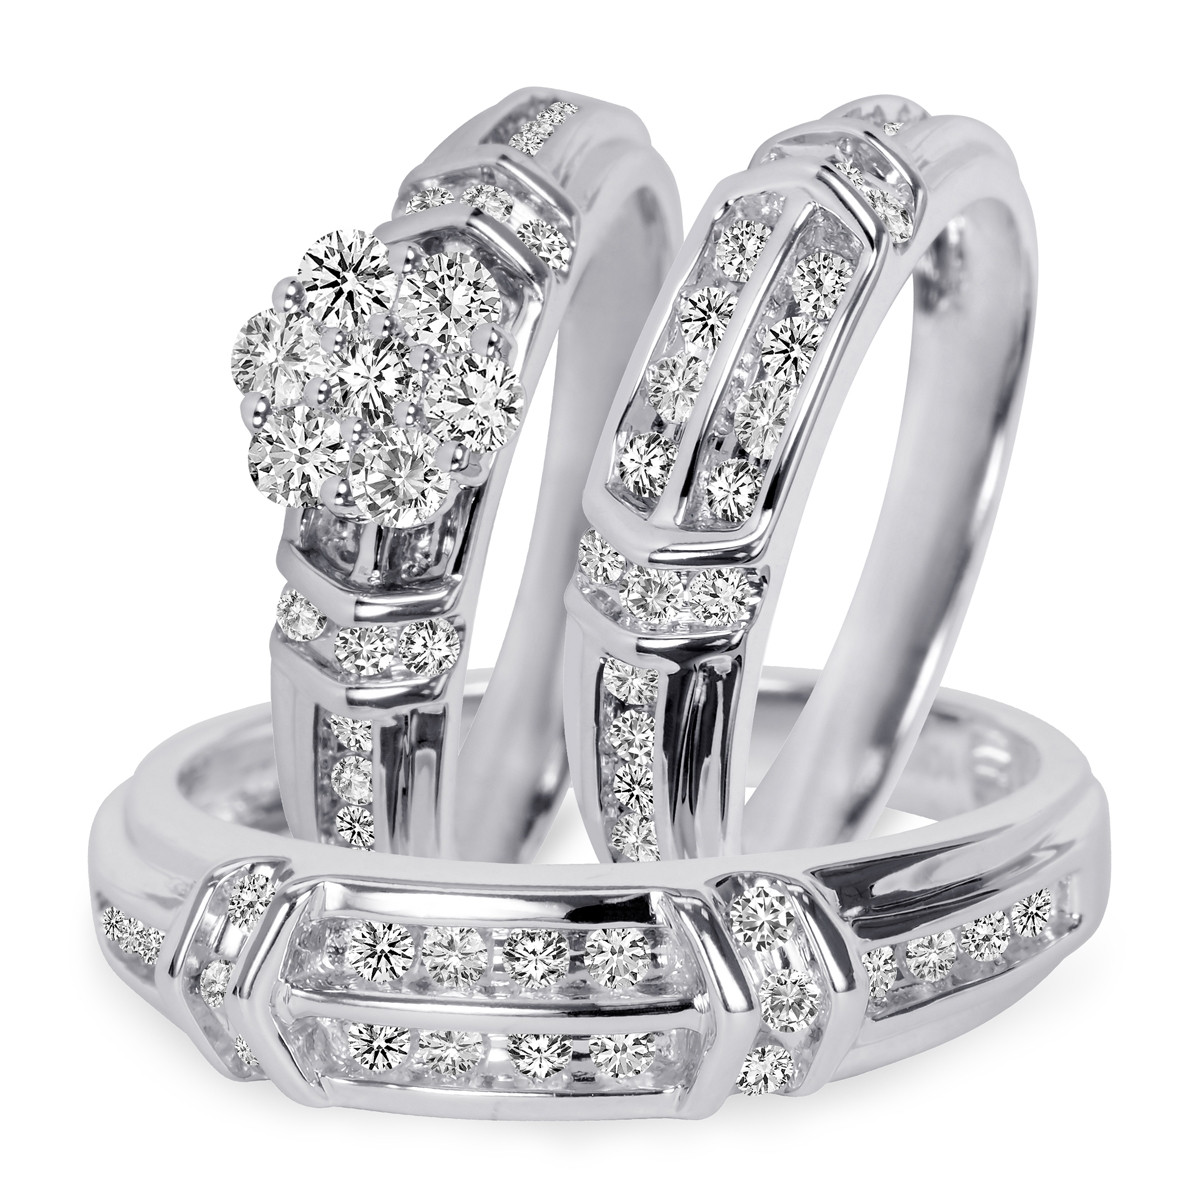 25 Ideas for Cheap Wedding Ring Sets His and Hers - Home, Family, Style ...